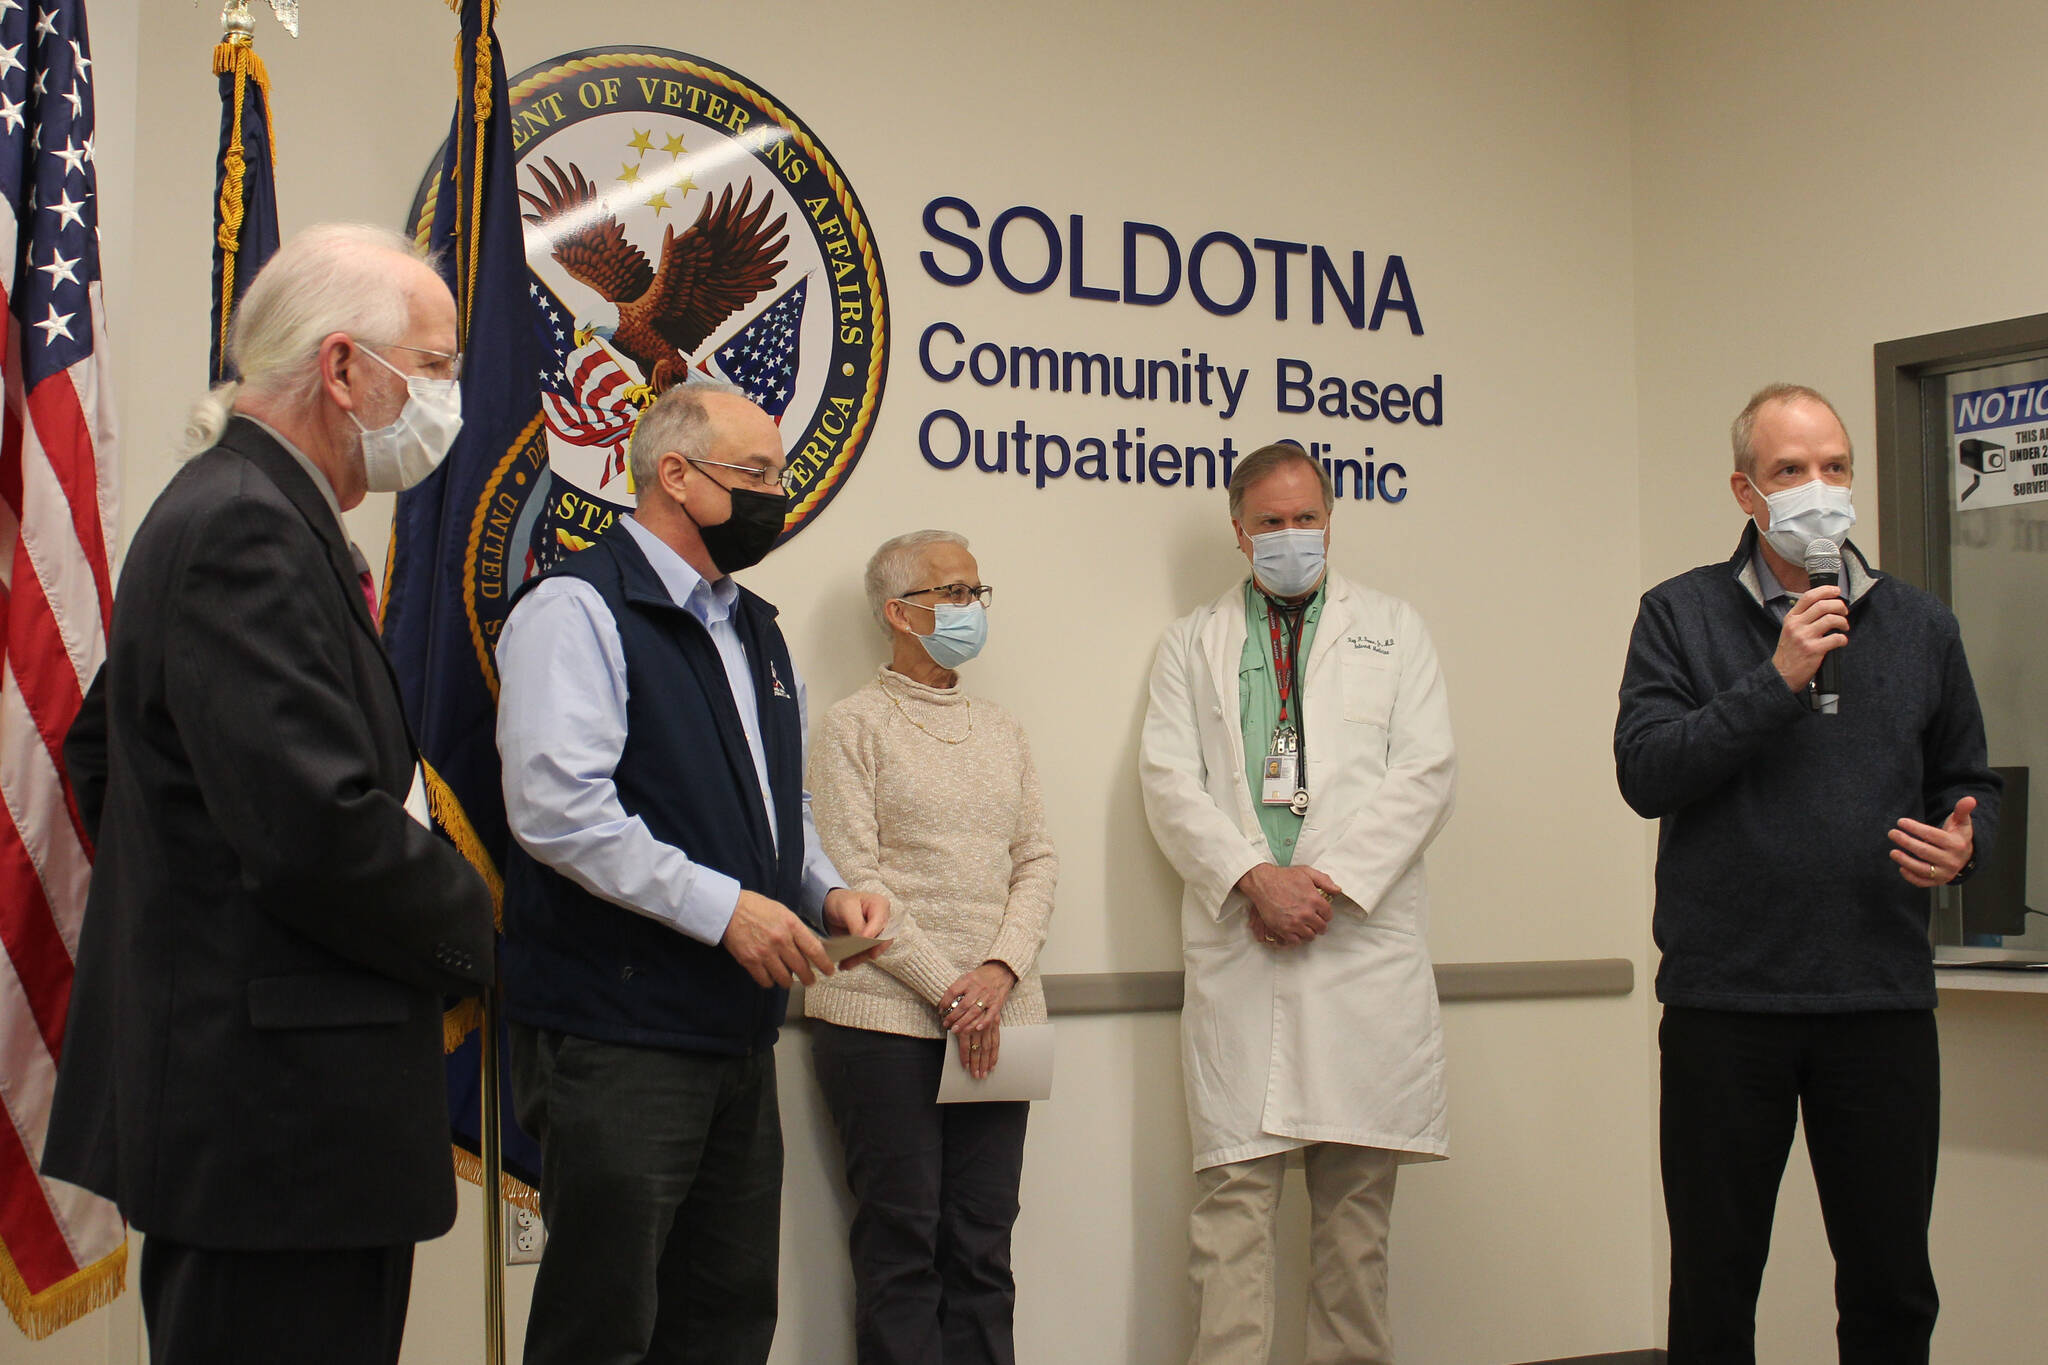 From left, Soldotna Mayor Paul Whitney, Alaska Office of Veterans Affair Director Verdie Bowen, Dr. Teresa Boyd, a doctor and Tom Steinbrunner attend a ribbon cutting ceremony at the Soldotna Community Based Outpatient Clinic on Wednesday, Dec. 29, 2021 in Soldotna, Alaska. (Ashlyn O’Hara/Peninsula Clarion)